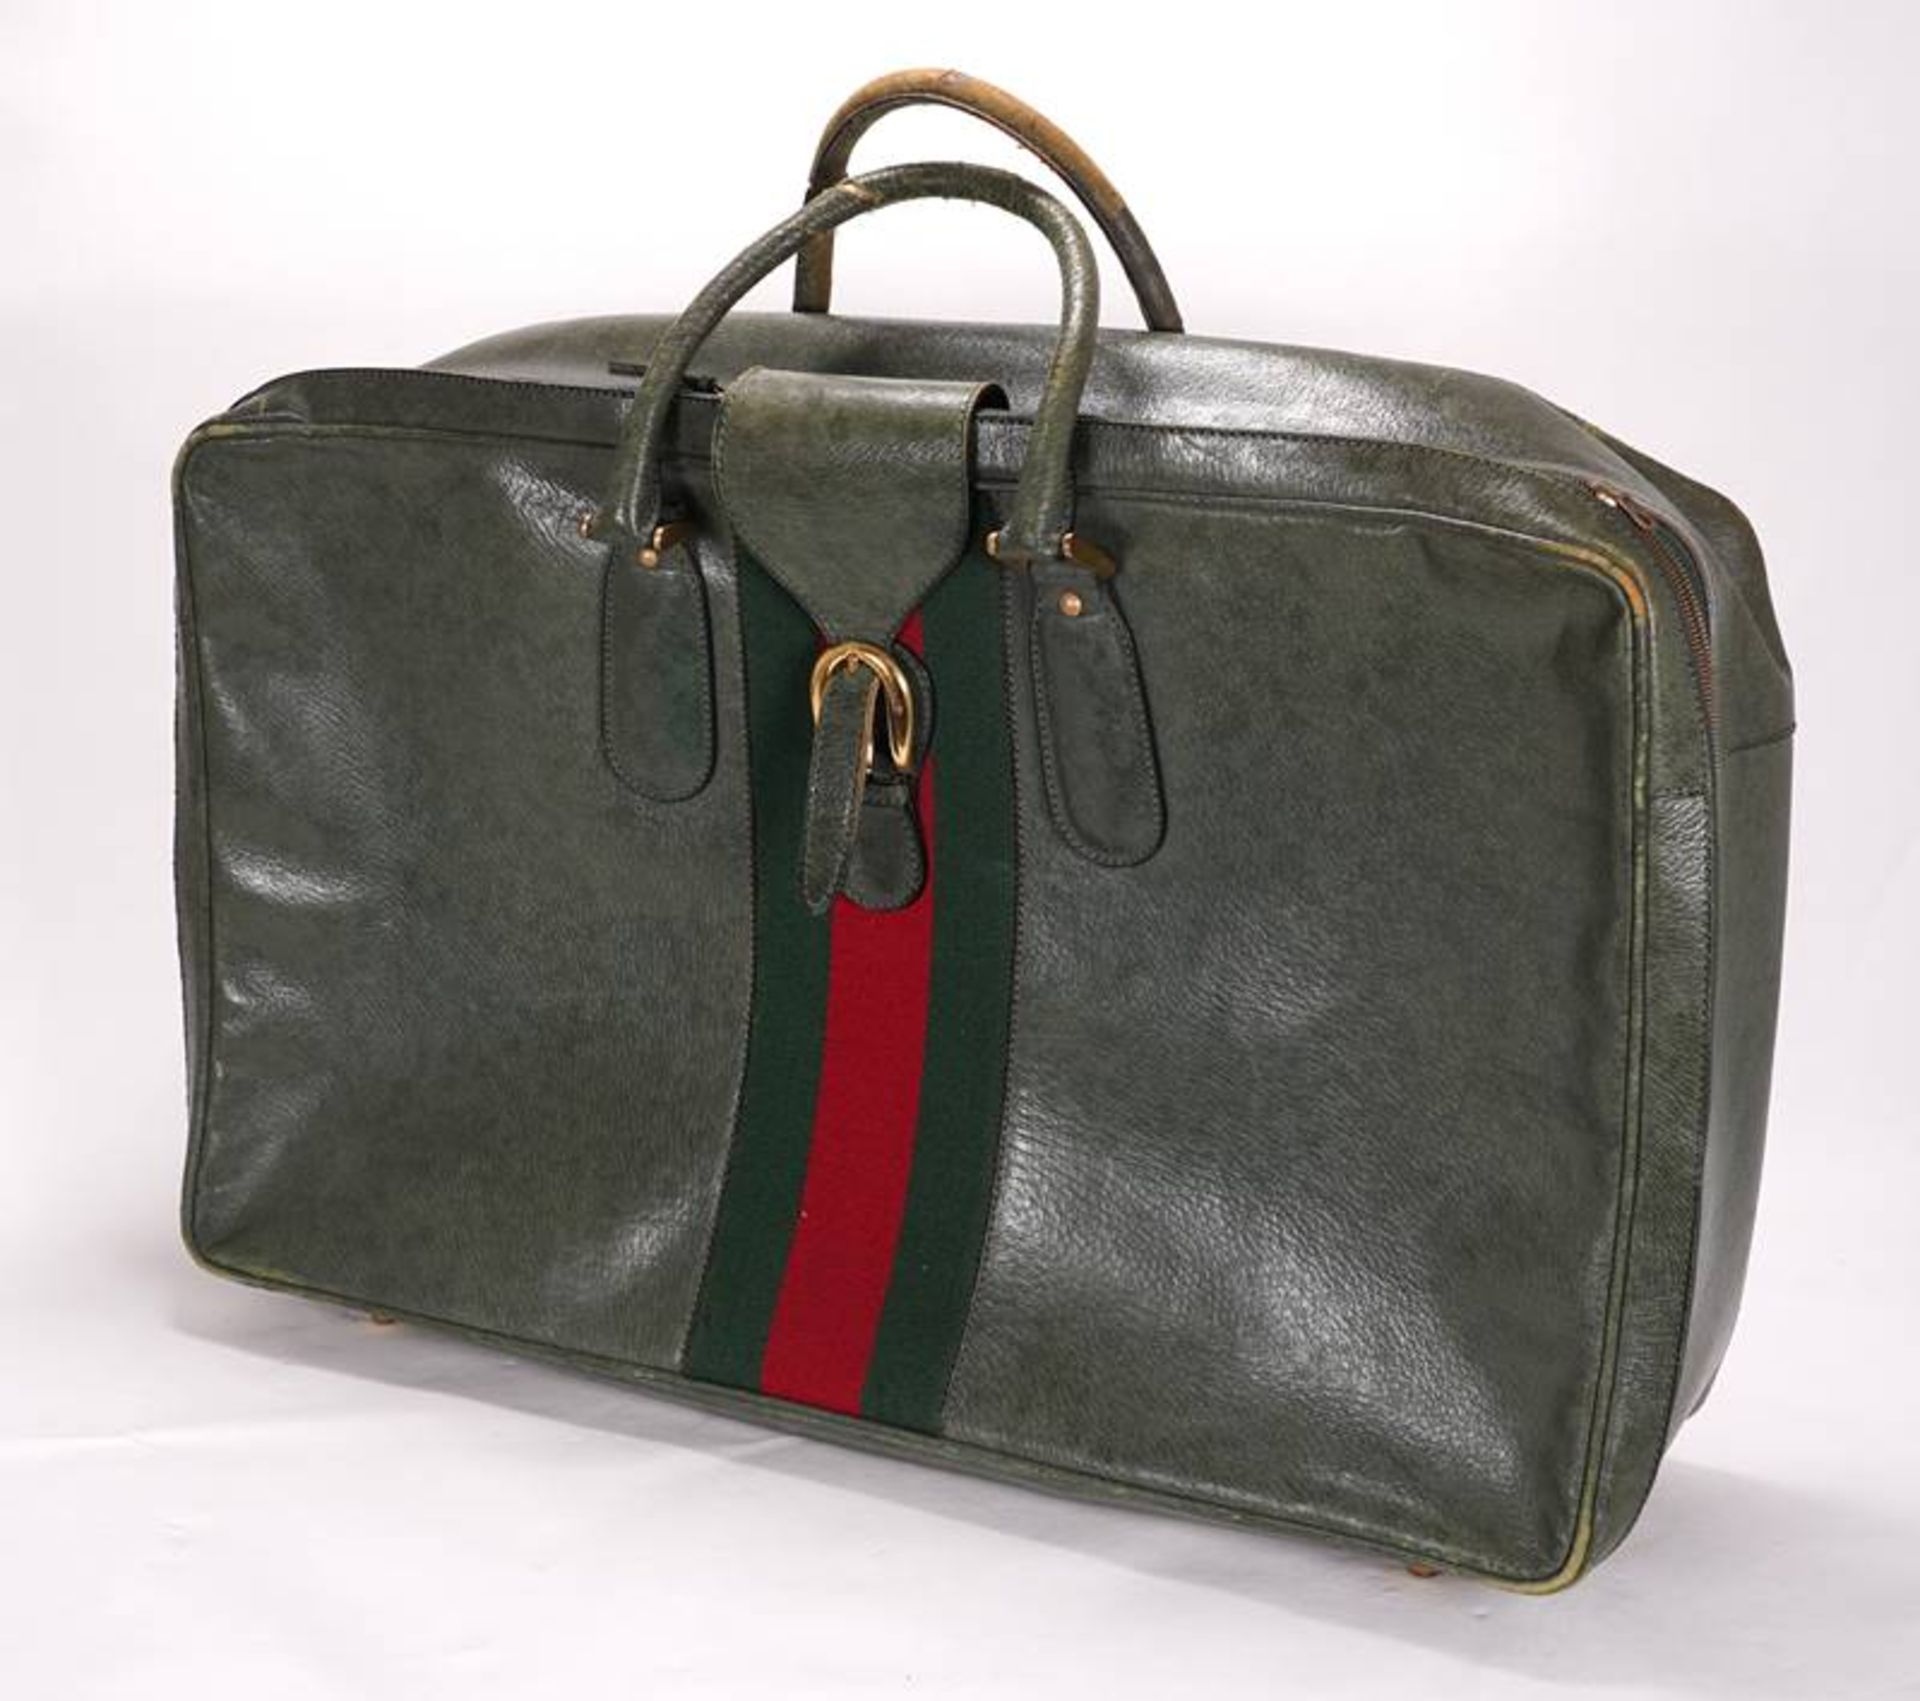 2 Gucci Leather Suitcases - Image 6 of 9